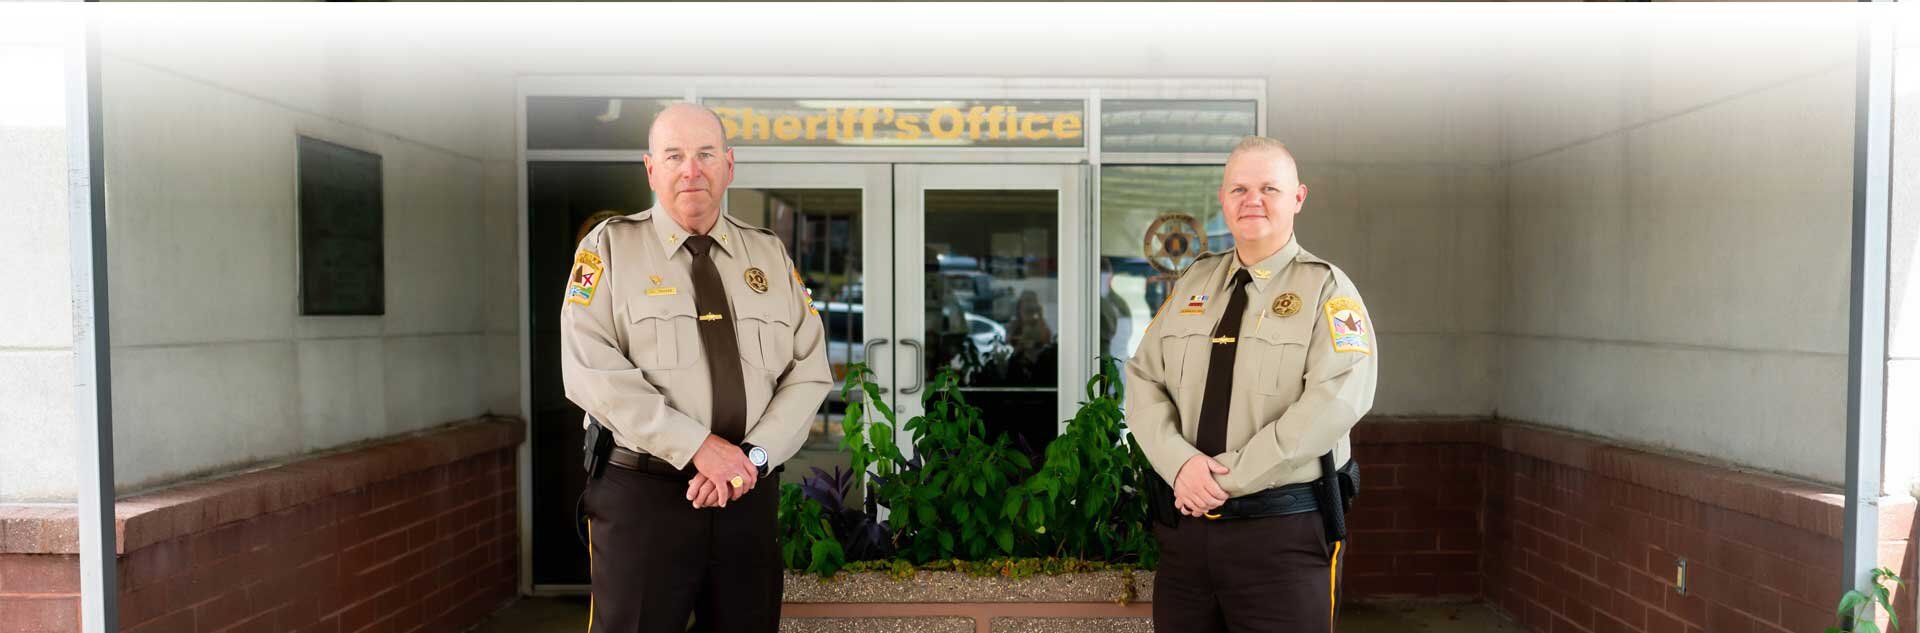 Sheriff Jeff Shaver and Chief Deputy Josh Summerford standing in front of the Sheriffs Office front door